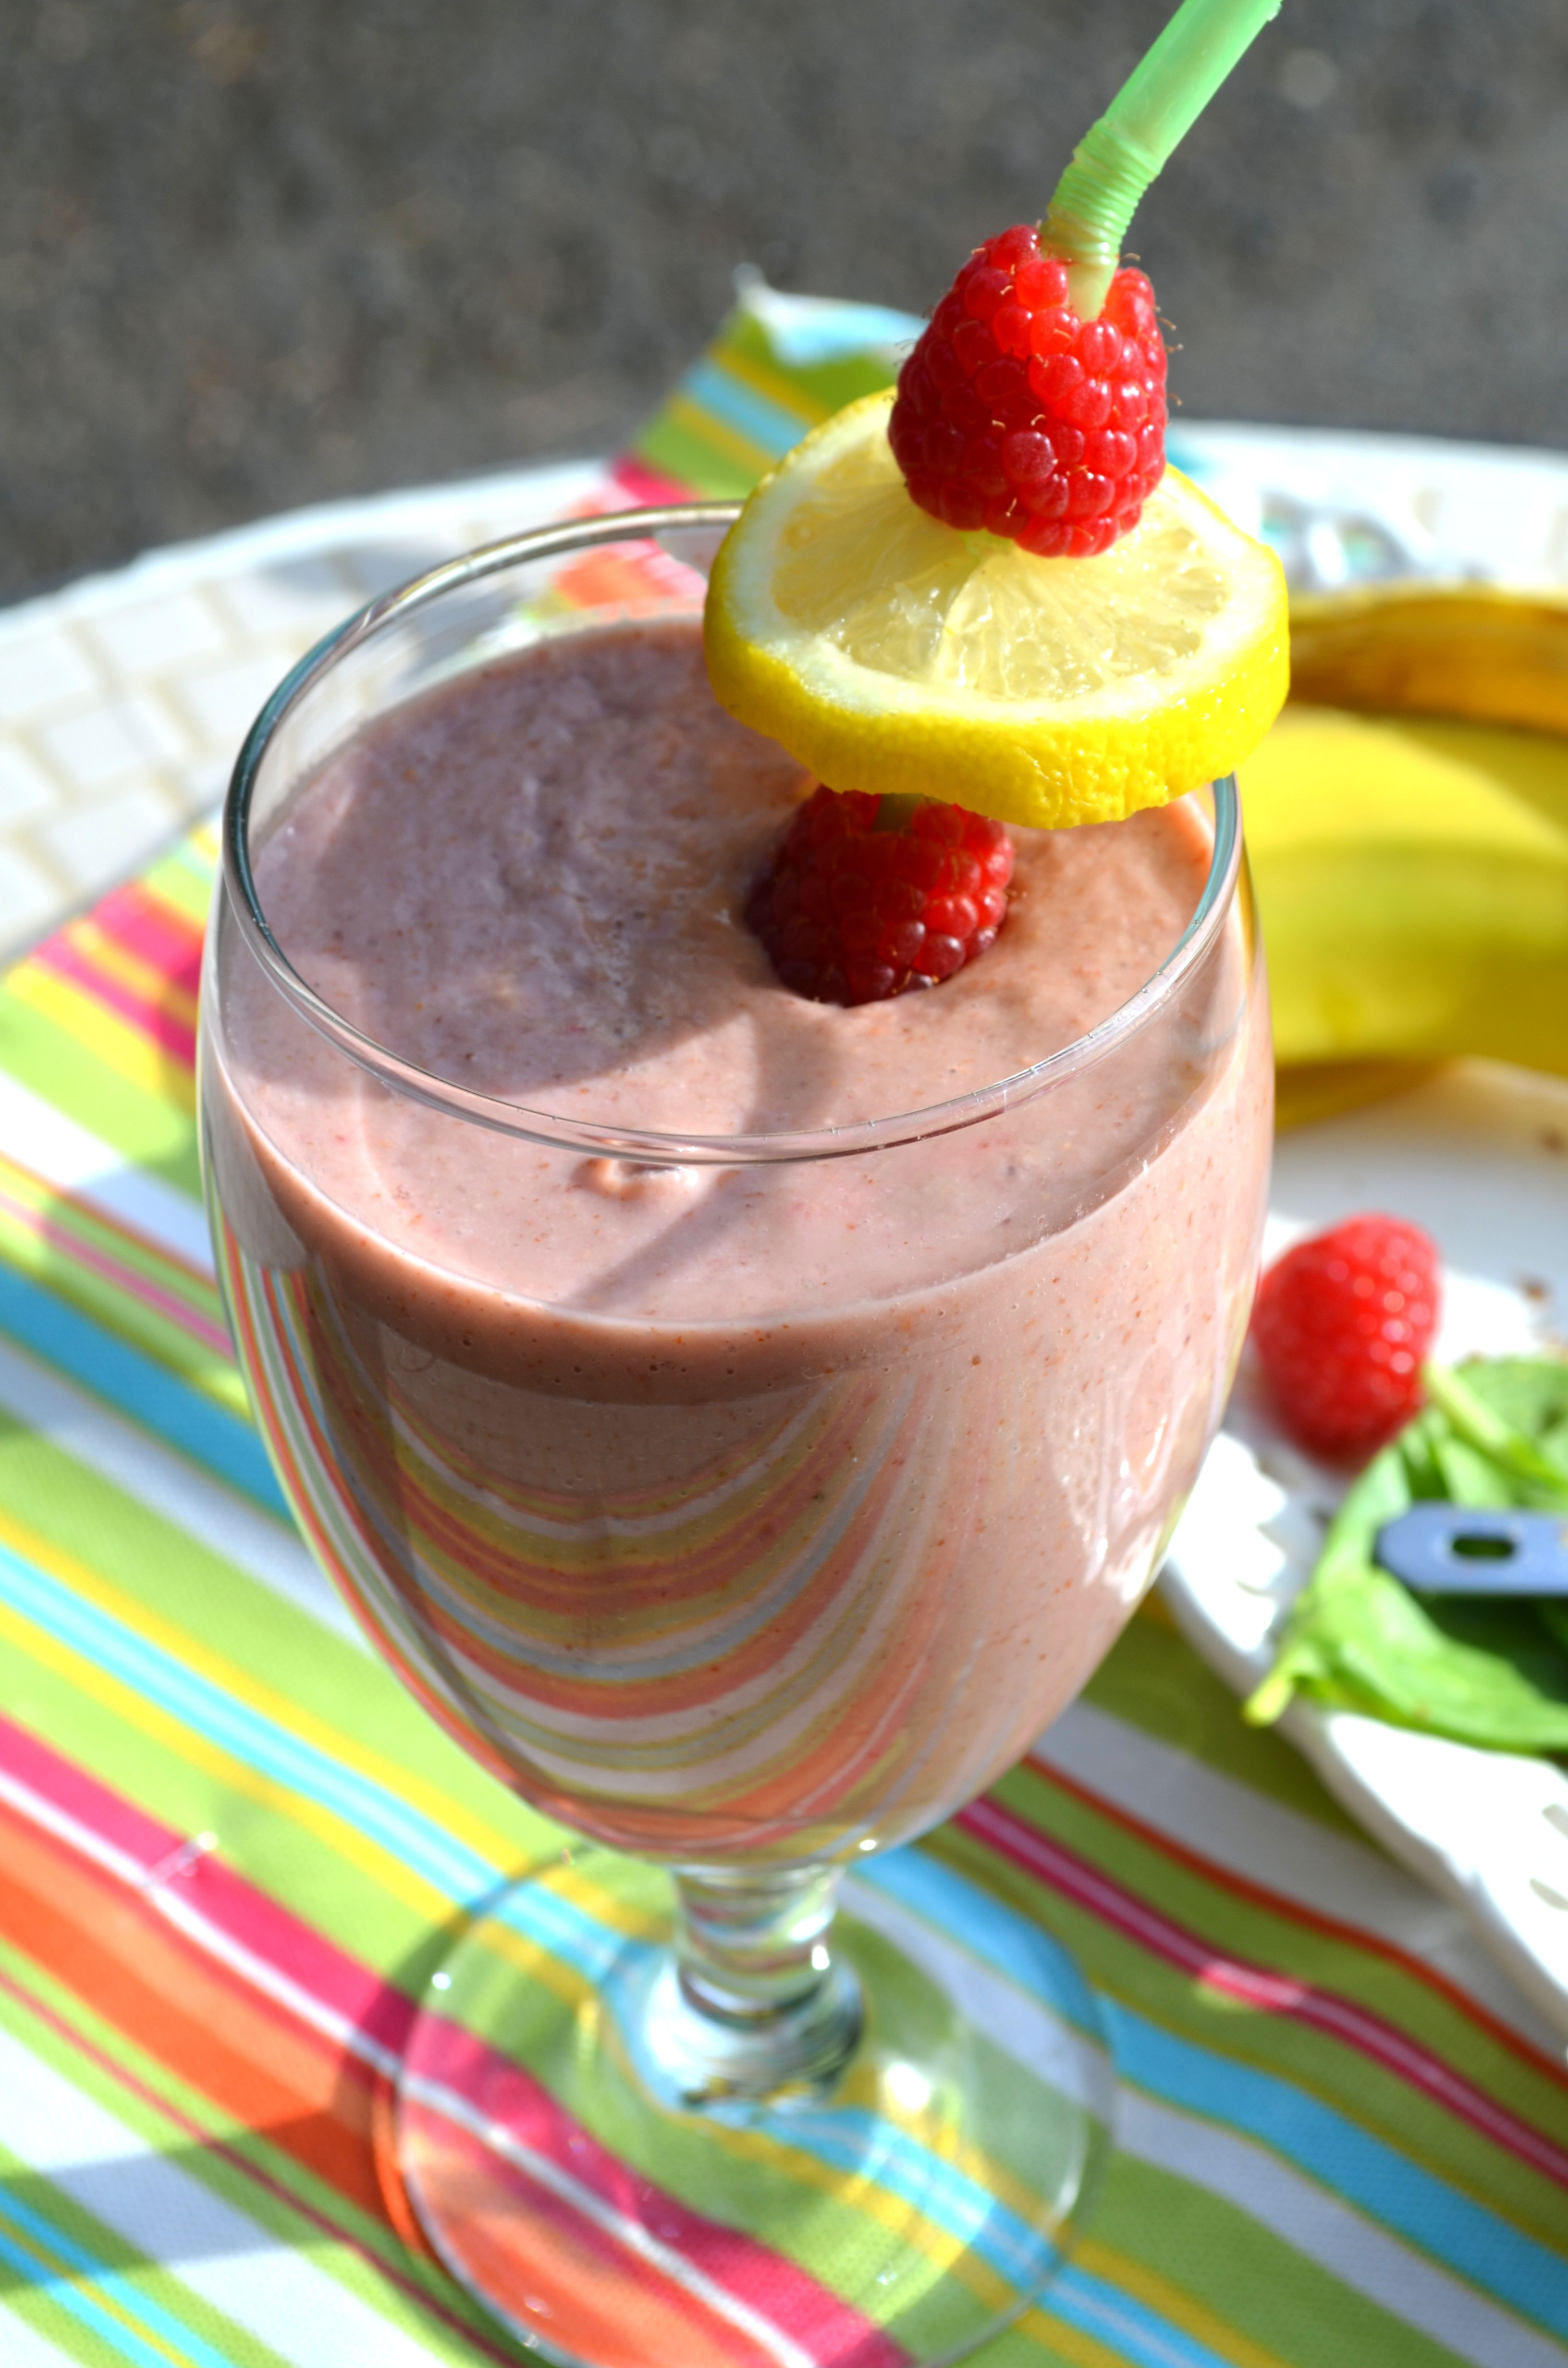 Dr Oz Breakfast Smoothies
 Breakfast Drink from Dr Oz’s 3 Day Cleanse